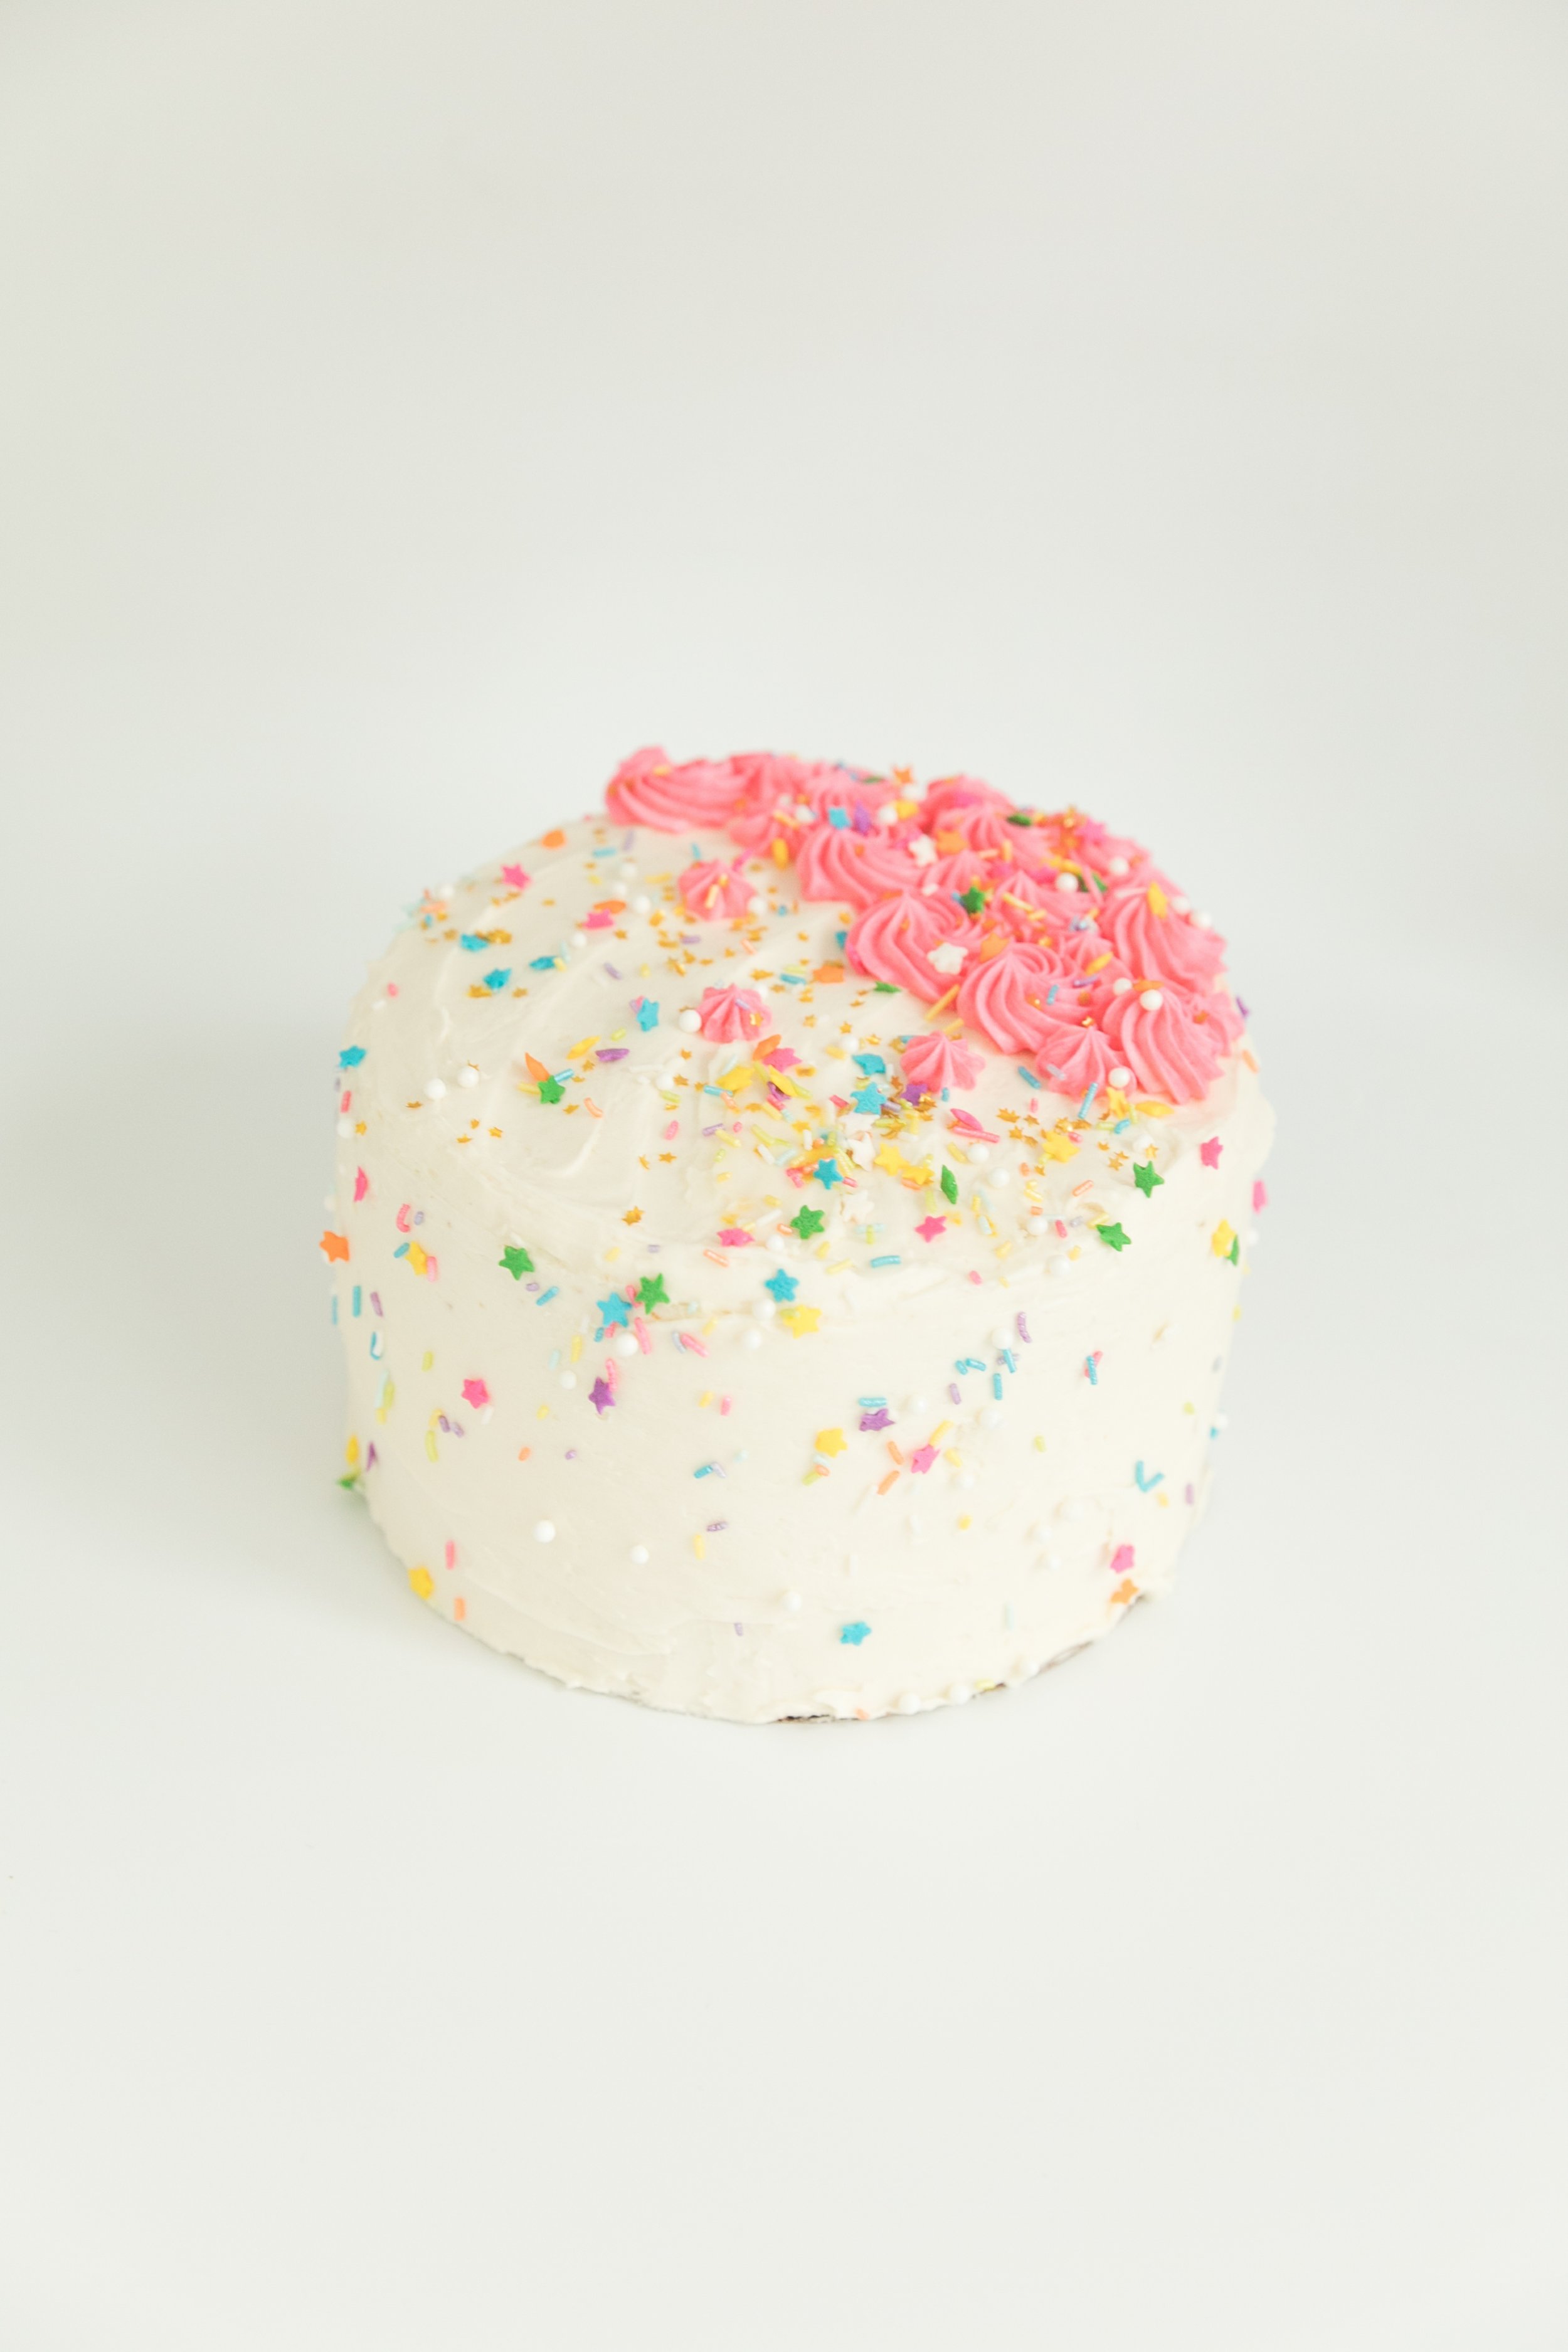  6 inch funfetti cake with sweetapolita sprinkles and pink stars made from vanilla buttercream.  